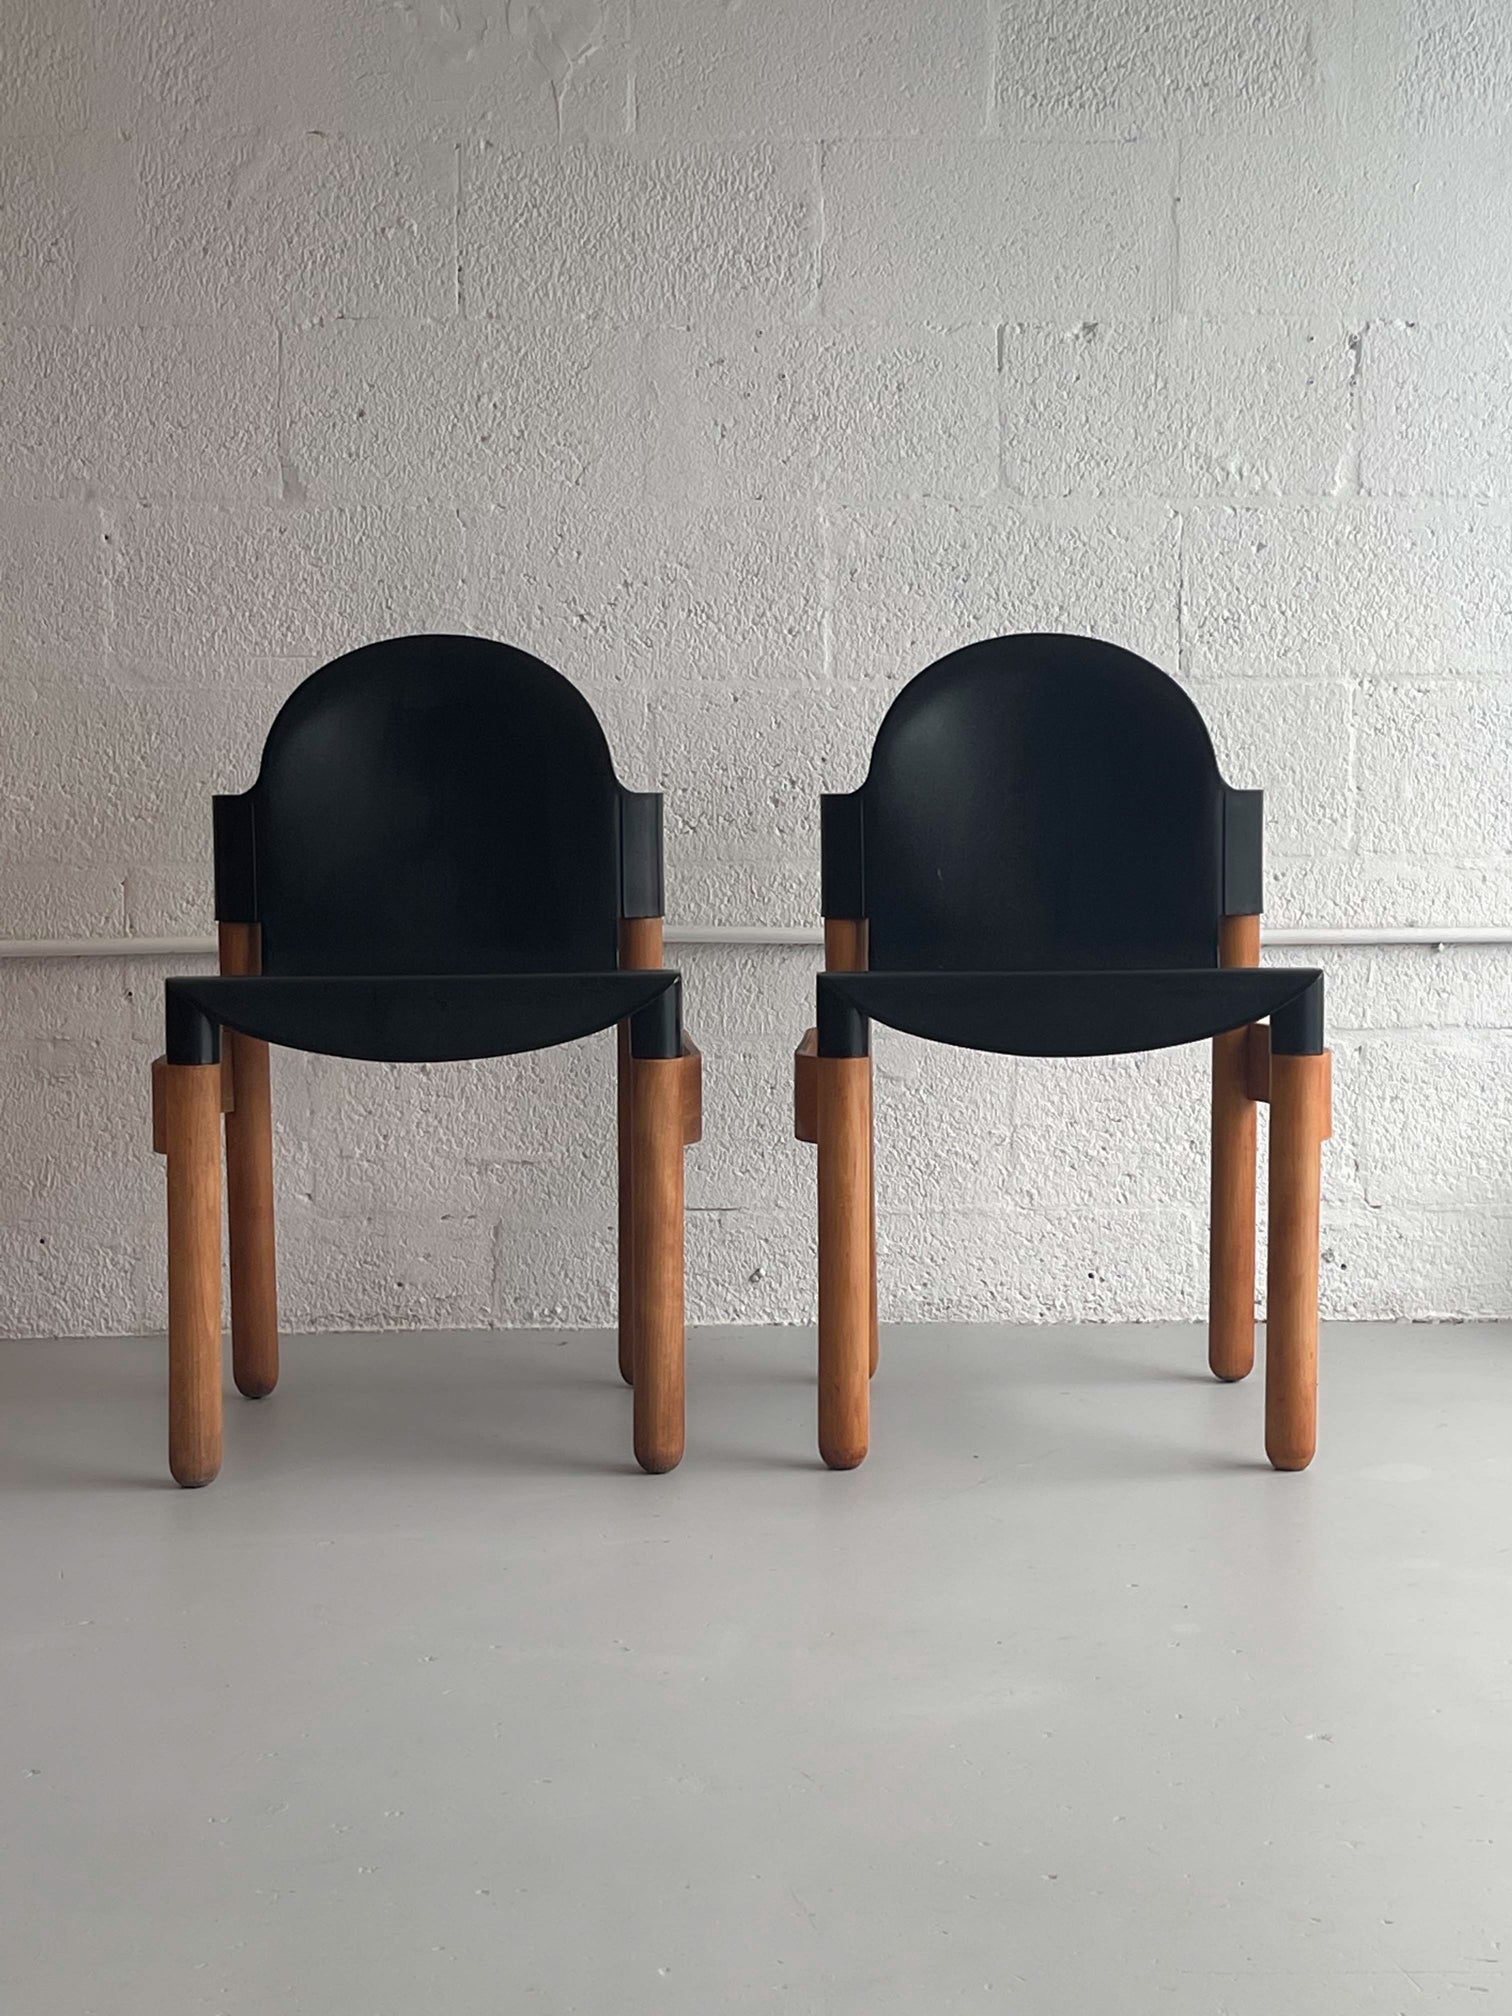 1970s "Flex 2000" Chairs by Gerd Lange for Thonet - A Pair